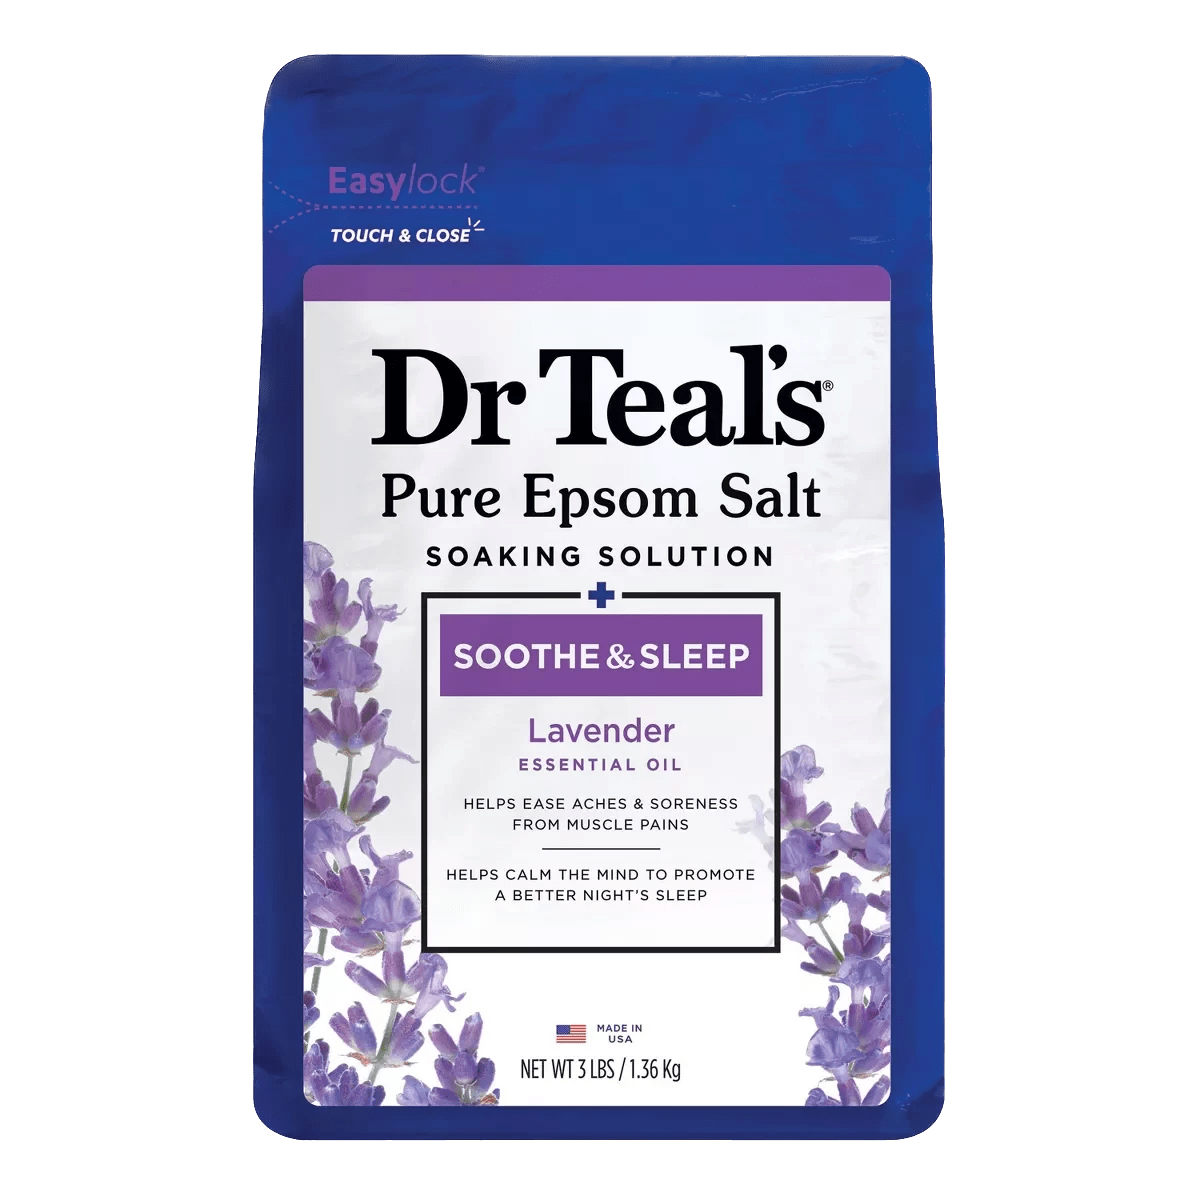 Dr. Teal’s Soothe & Sleep with Lavender Pure Epsom Salt Soaking Solution